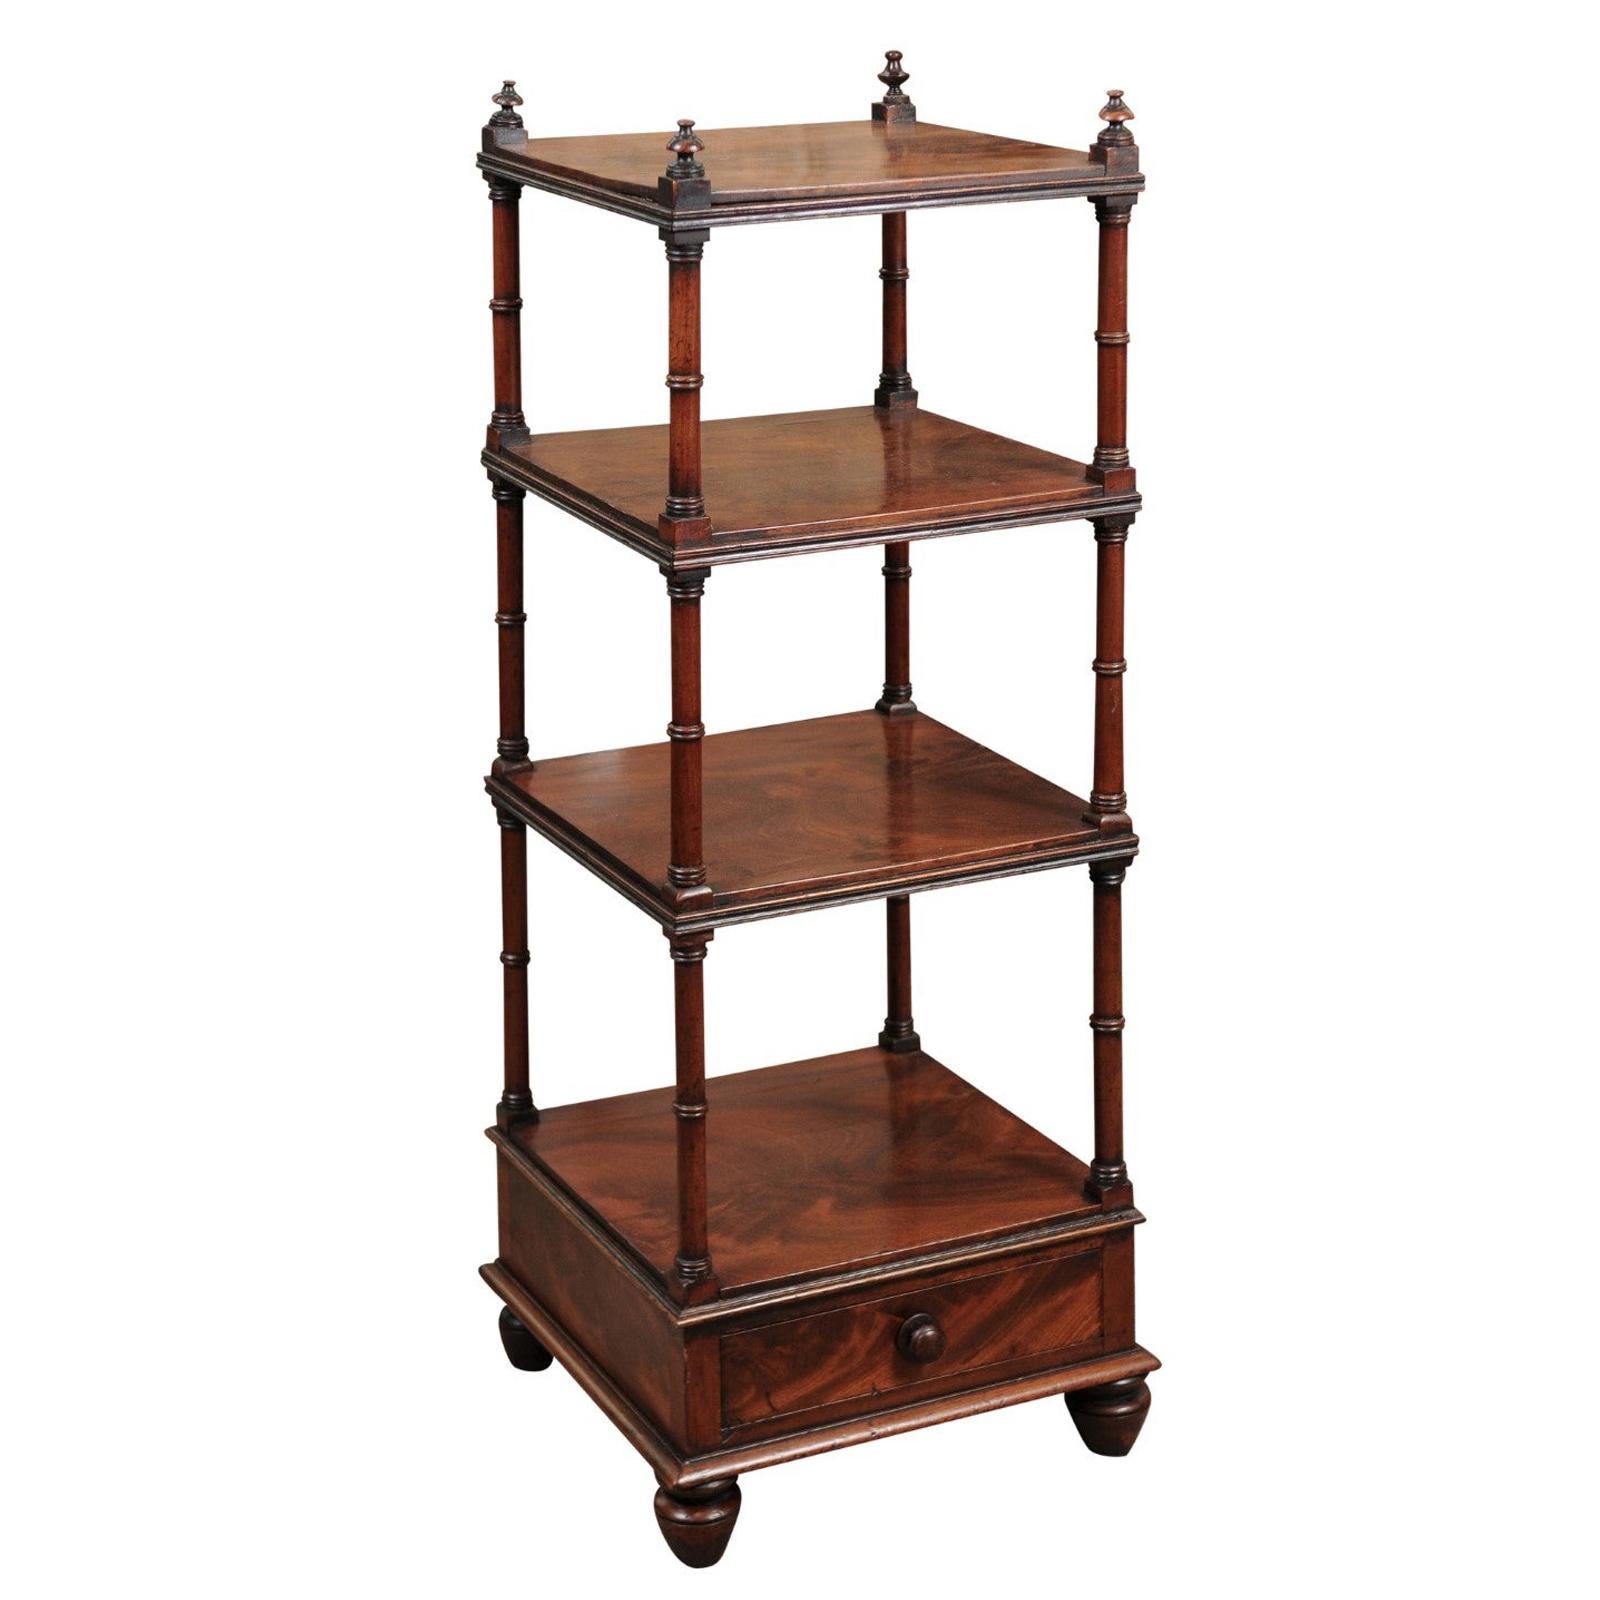 19th Century Mahogany Etagere with 4 Tiers